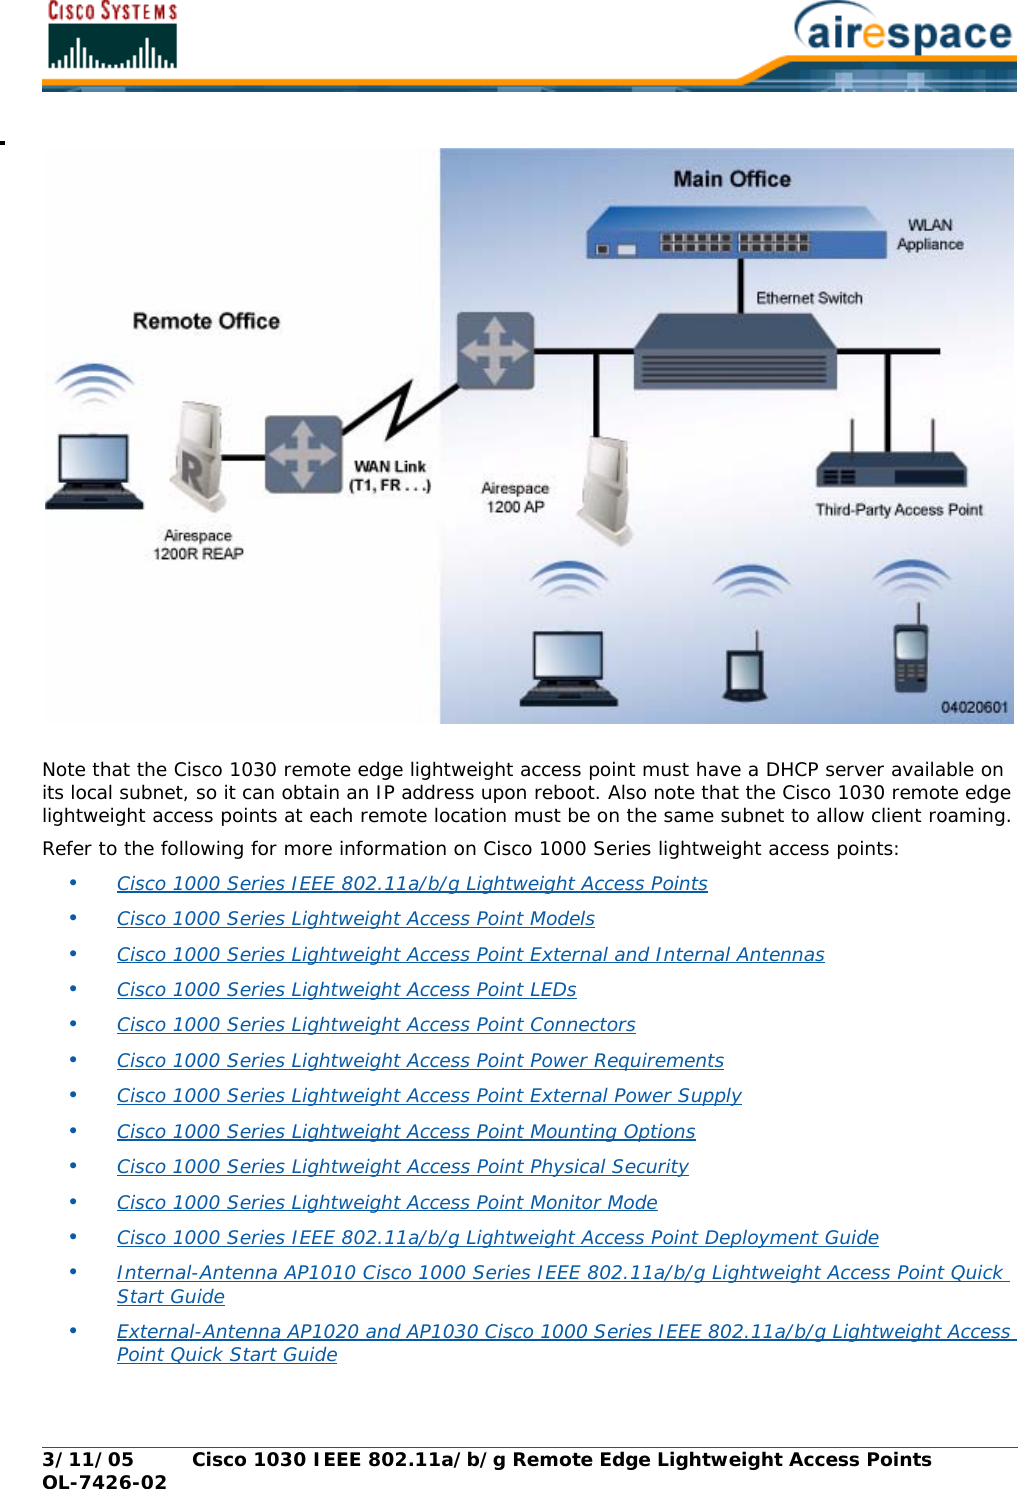 3/11/05 Cisco 1030 IEEE 802.11a/b/g Remote Edge Lightweight Access Points  OL-7426-02Note that the Cisco 1030 remote edge lightweight access point must have a DHCP server available on its local subnet, so it can obtain an IP address upon reboot. Also note that the Cisco 1030 remote edge lightweight access points at each remote location must be on the same subnet to allow client roaming.Refer to the following for more information on Cisco 1000 Series lightweight access points:•Cisco 1000 Series IEEE 802.11a/b/g Lightweight Access Points •Cisco 1000 Series Lightweight Access Point Models •Cisco 1000 Series Lightweight Access Point External and Internal Antennas •Cisco 1000 Series Lightweight Access Point LEDs •Cisco 1000 Series Lightweight Access Point Connectors •Cisco 1000 Series Lightweight Access Point Power Requirements •Cisco 1000 Series Lightweight Access Point External Power Supply •Cisco 1000 Series Lightweight Access Point Mounting Options •Cisco 1000 Series Lightweight Access Point Physical Security •Cisco 1000 Series Lightweight Access Point Monitor Mode •Cisco 1000 Series IEEE 802.11a/b/g Lightweight Access Point Deployment Guide •Internal-Antenna AP1010 Cisco 1000 Series IEEE 802.11a/b/g Lightweight Access Point Quick Start Guide •External-Antenna AP1020 and AP1030 Cisco 1000 Series IEEE 802.11a/b/g Lightweight Access Point Quick Start Guide 